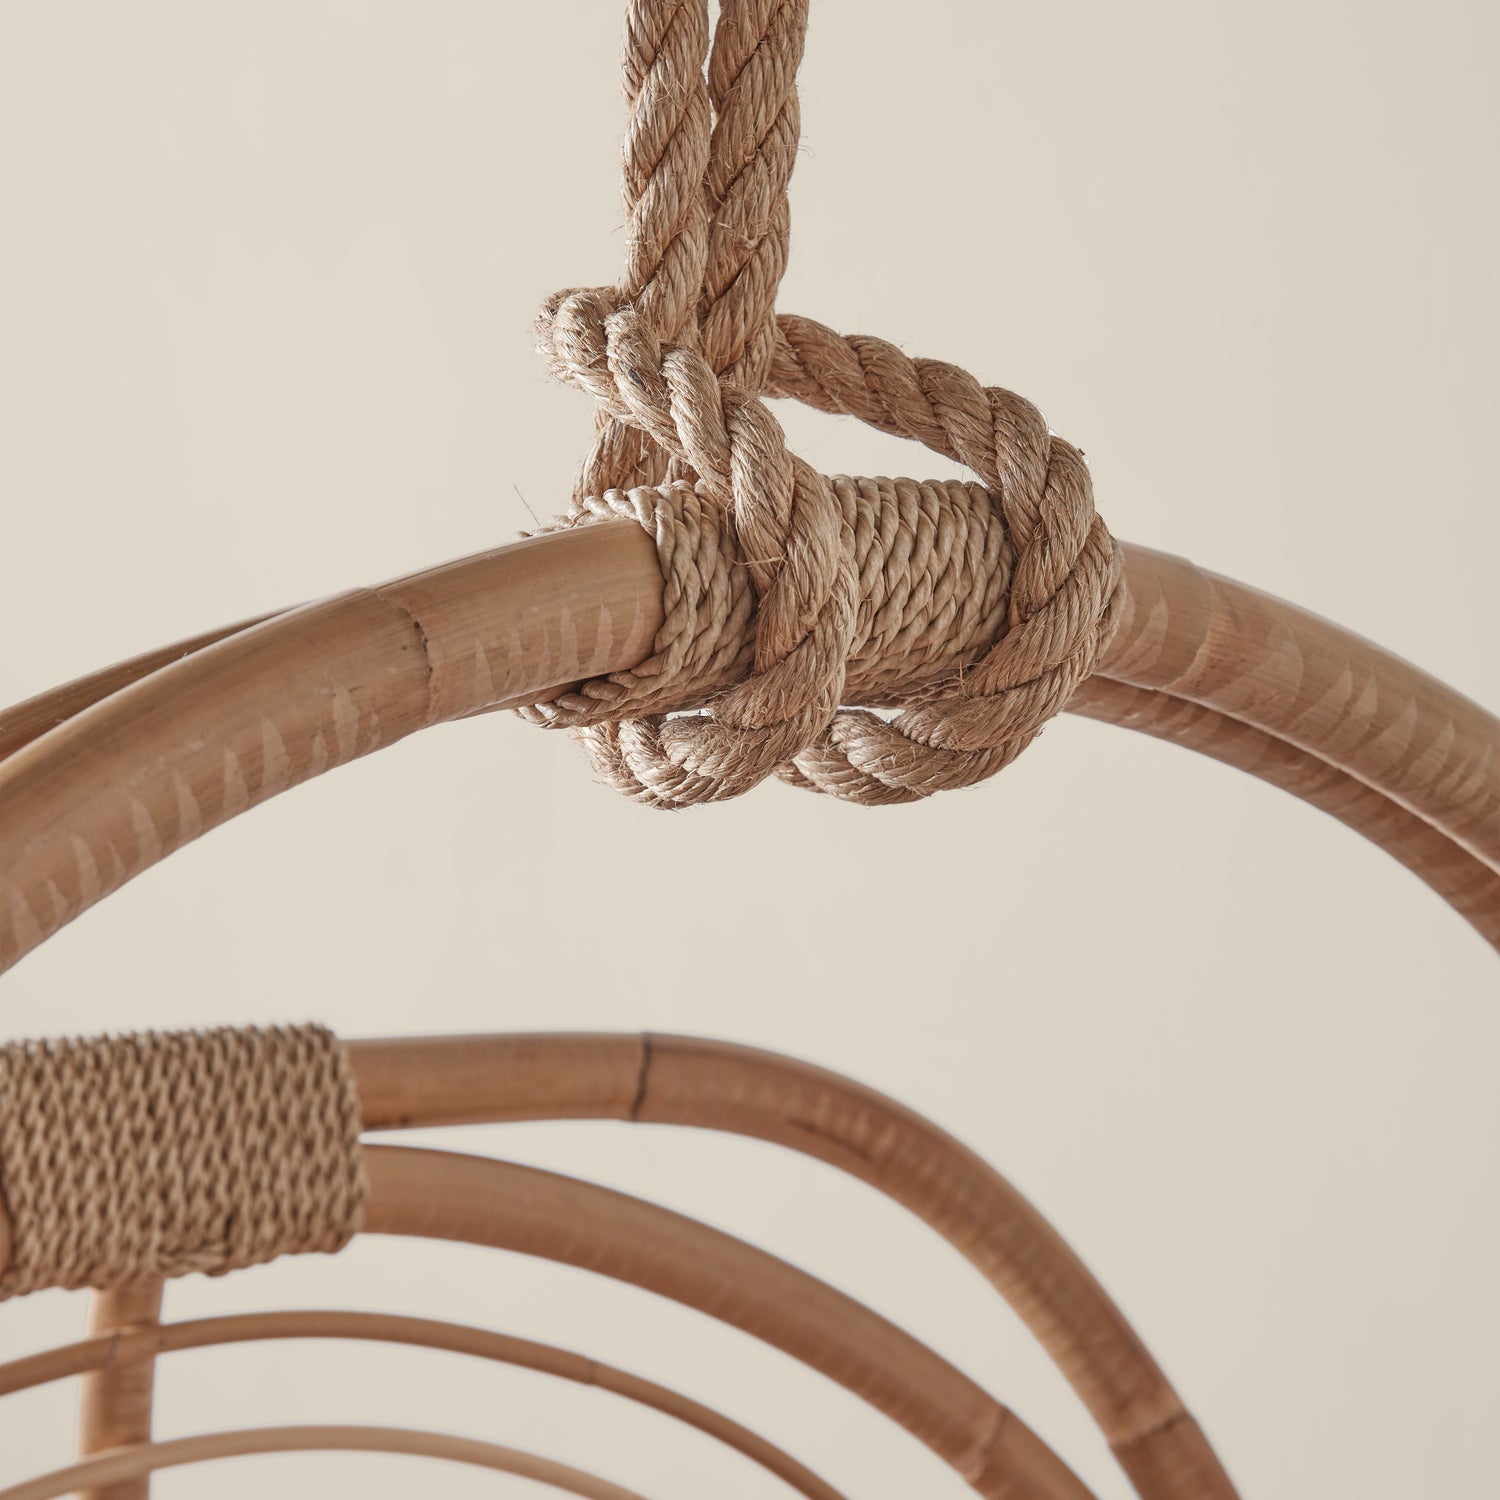 A close up of the rope detailing on the hanging rattan chair.